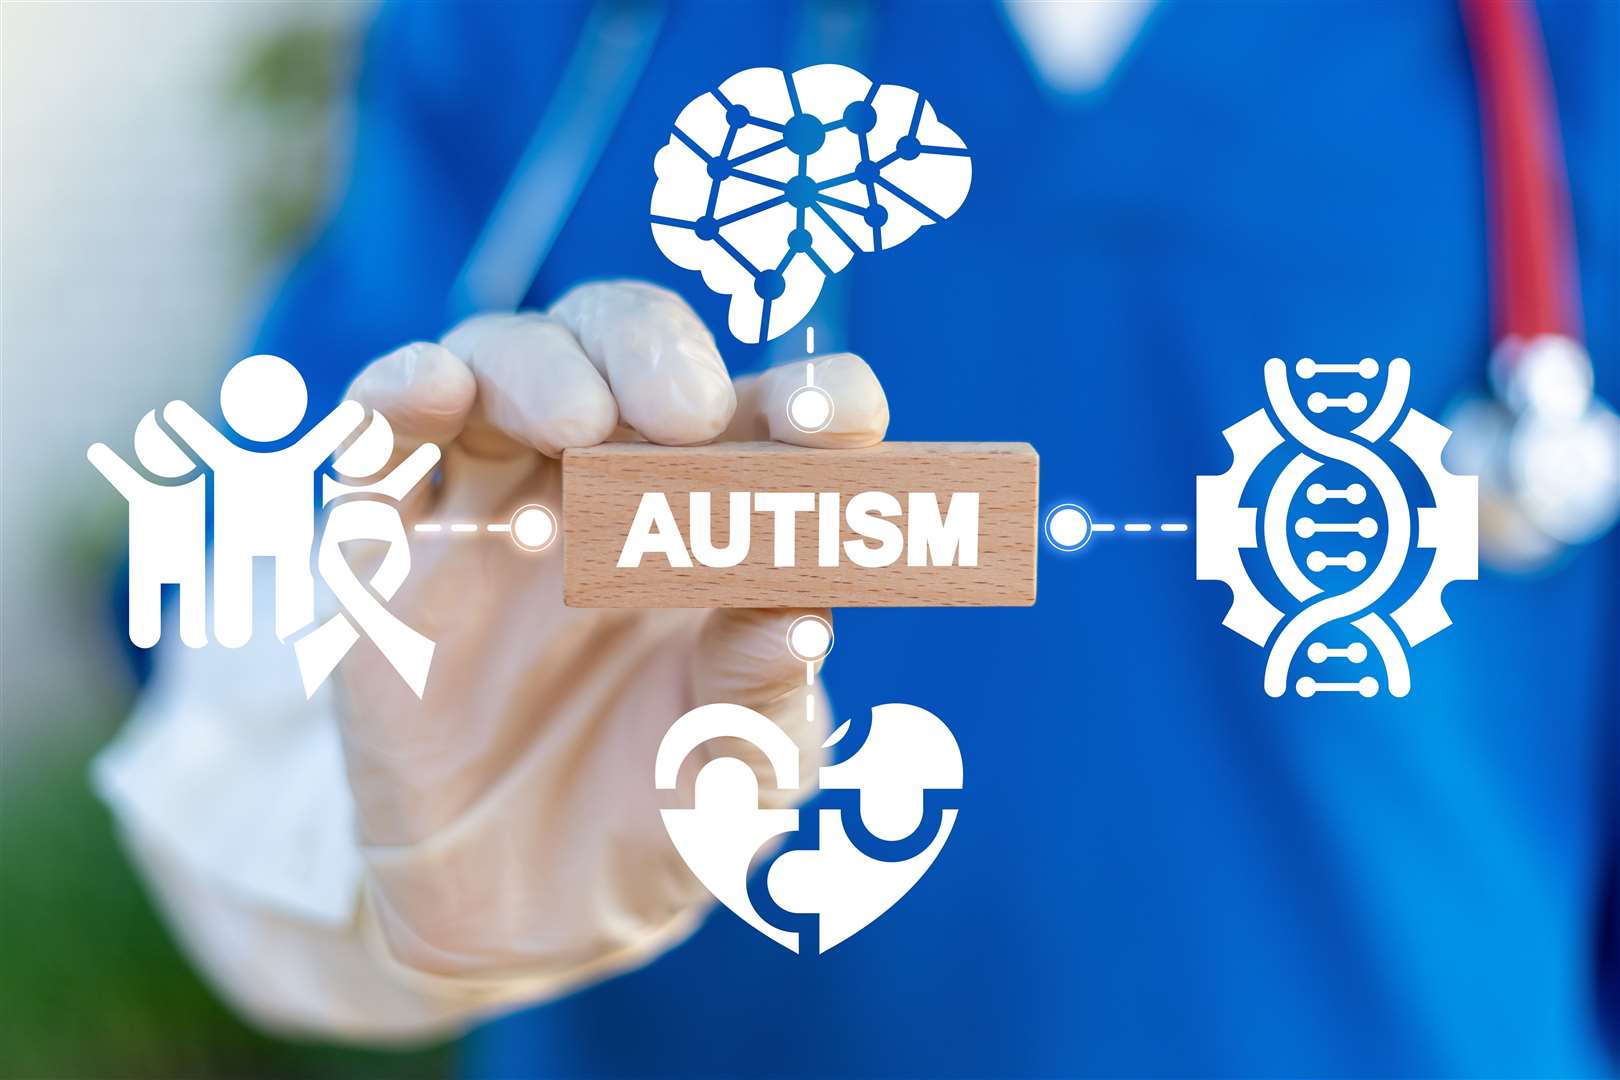 Autism diagnoses can give people clarity over their actions, and help them prepare for potential triggers.